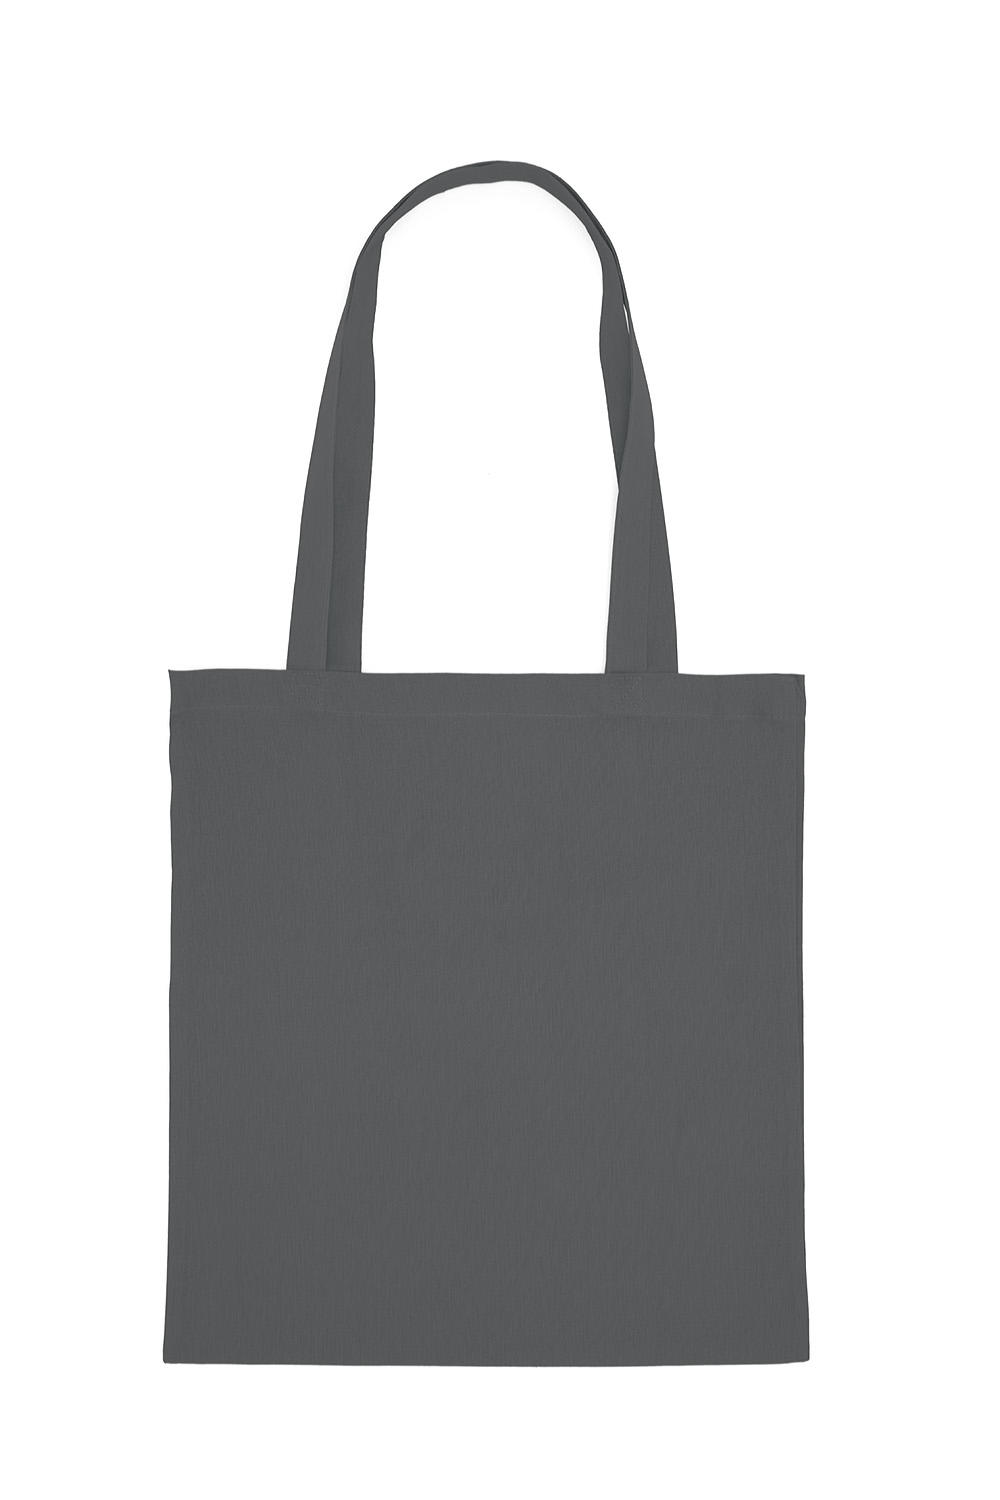  Cotton Bag LH in Farbe Charcoal